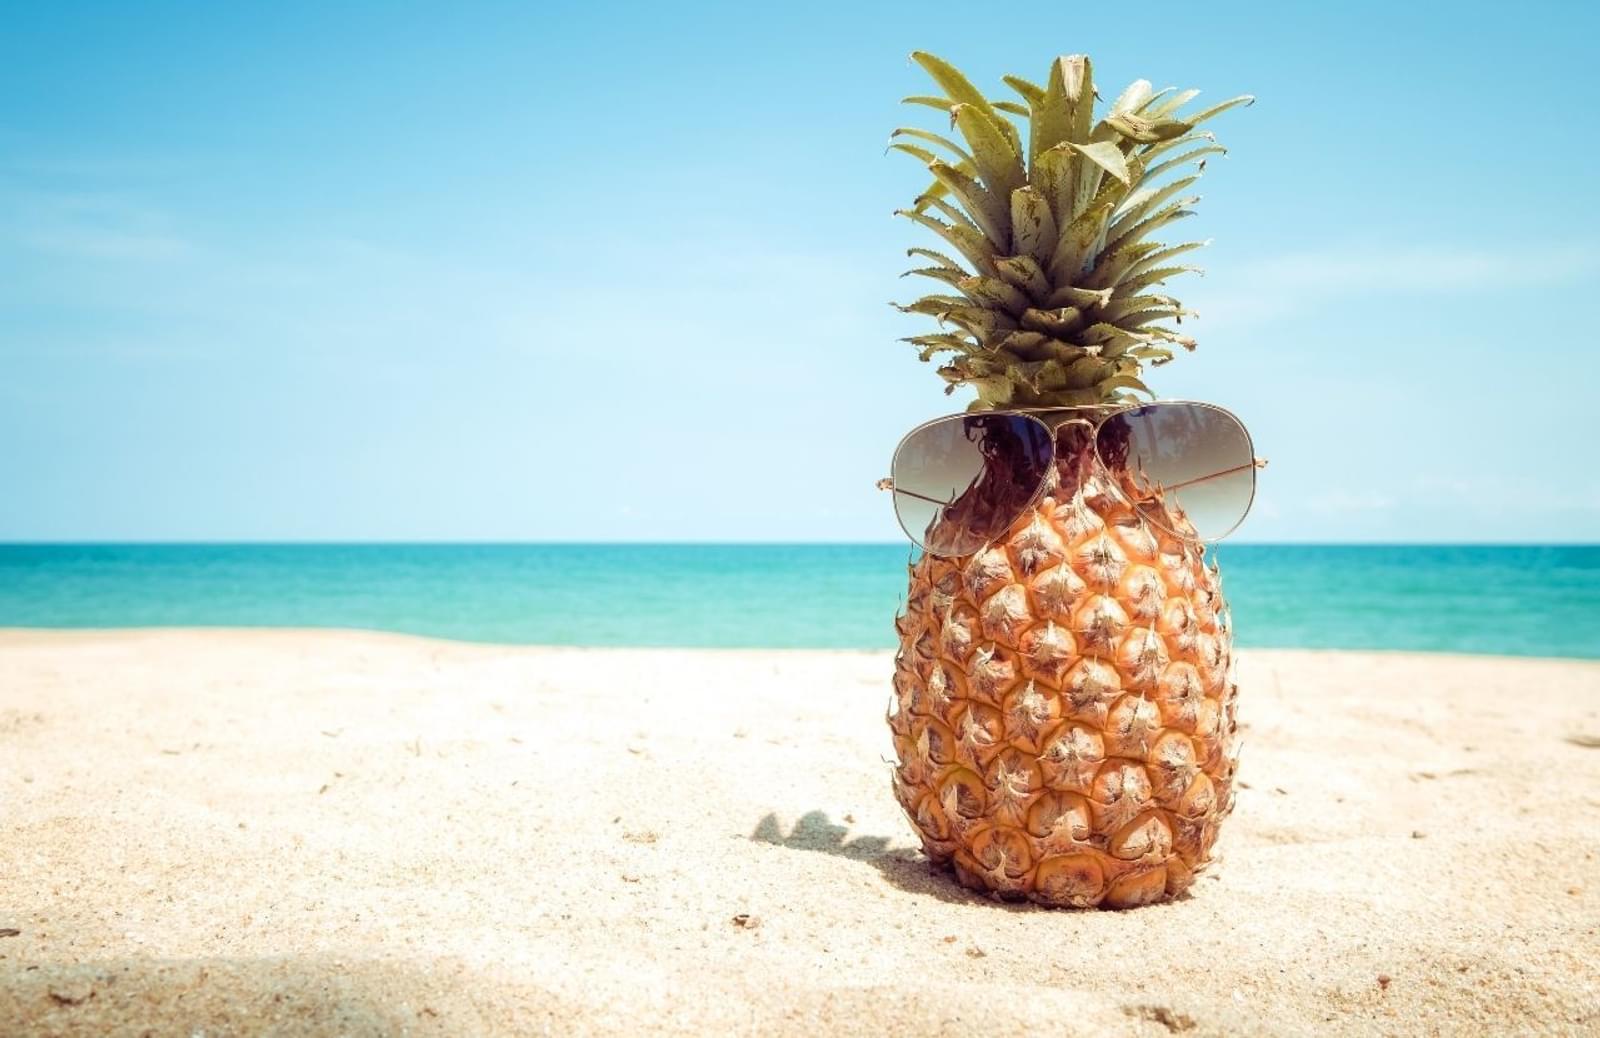 Pineapple wearing subglasses on a sunny beach